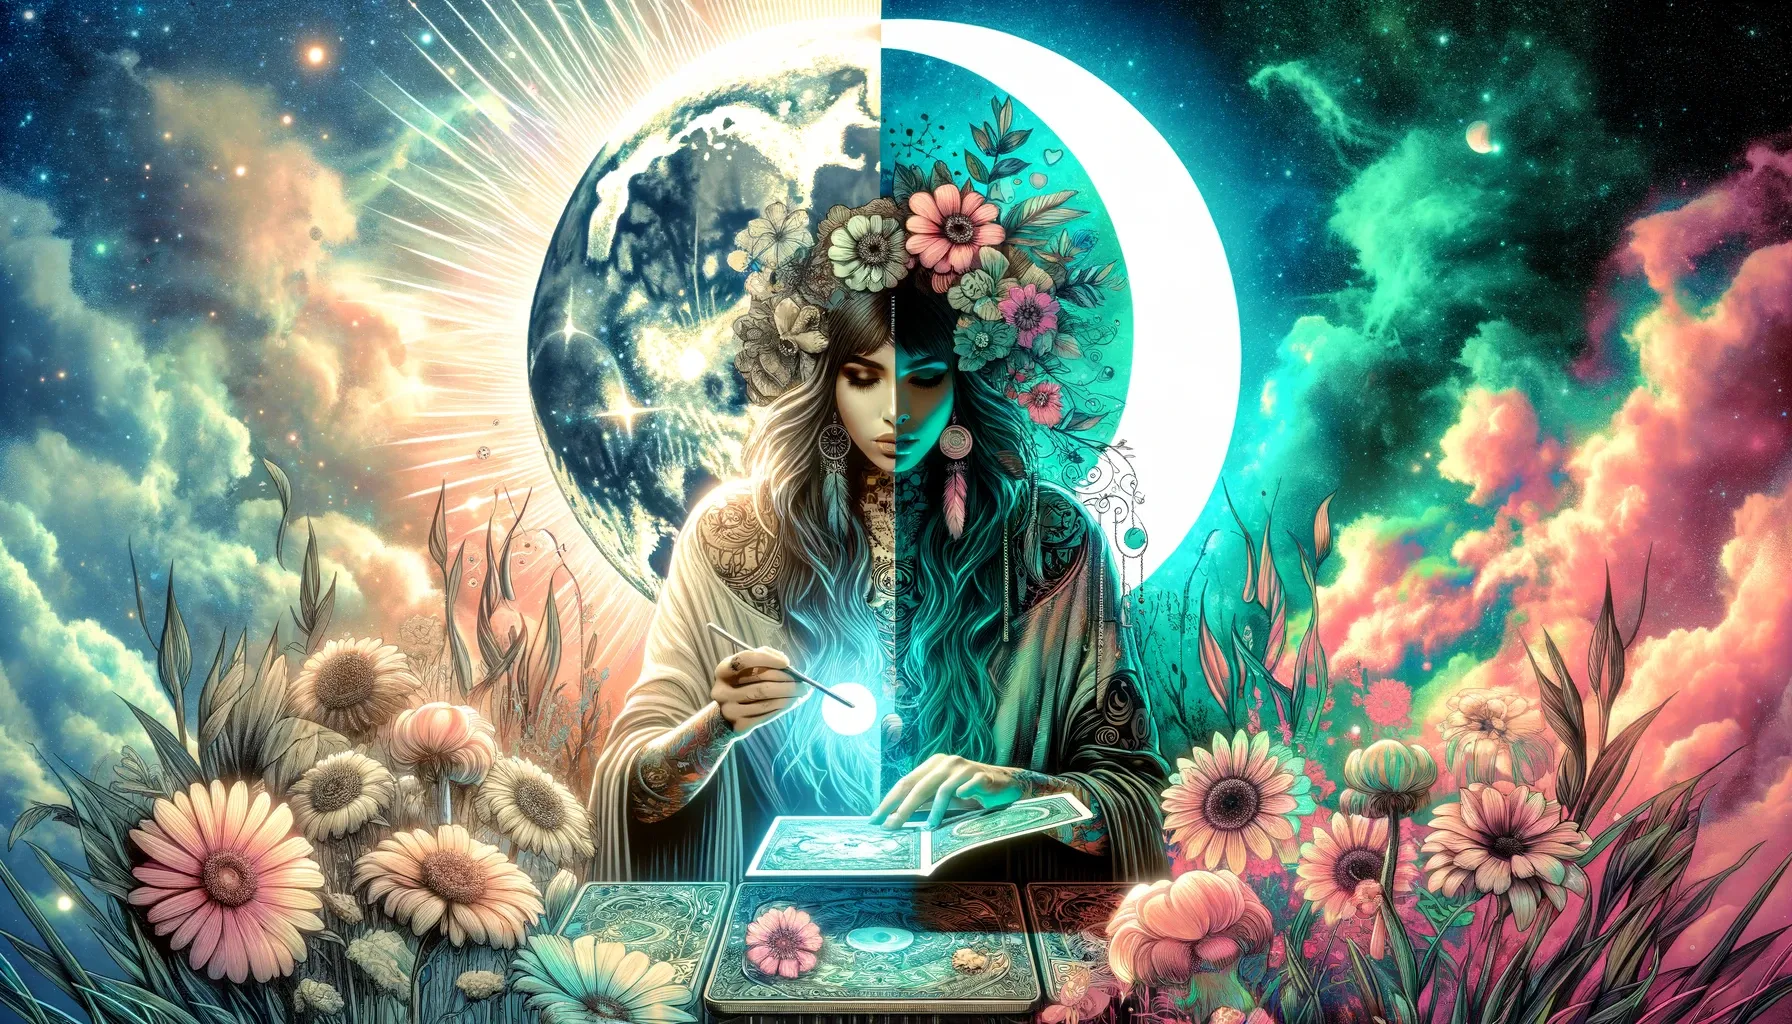 A woman with tattoos is in front of the Third Quarter Half Moon and surrounded by flowers while she holds a light and reads sacred text.